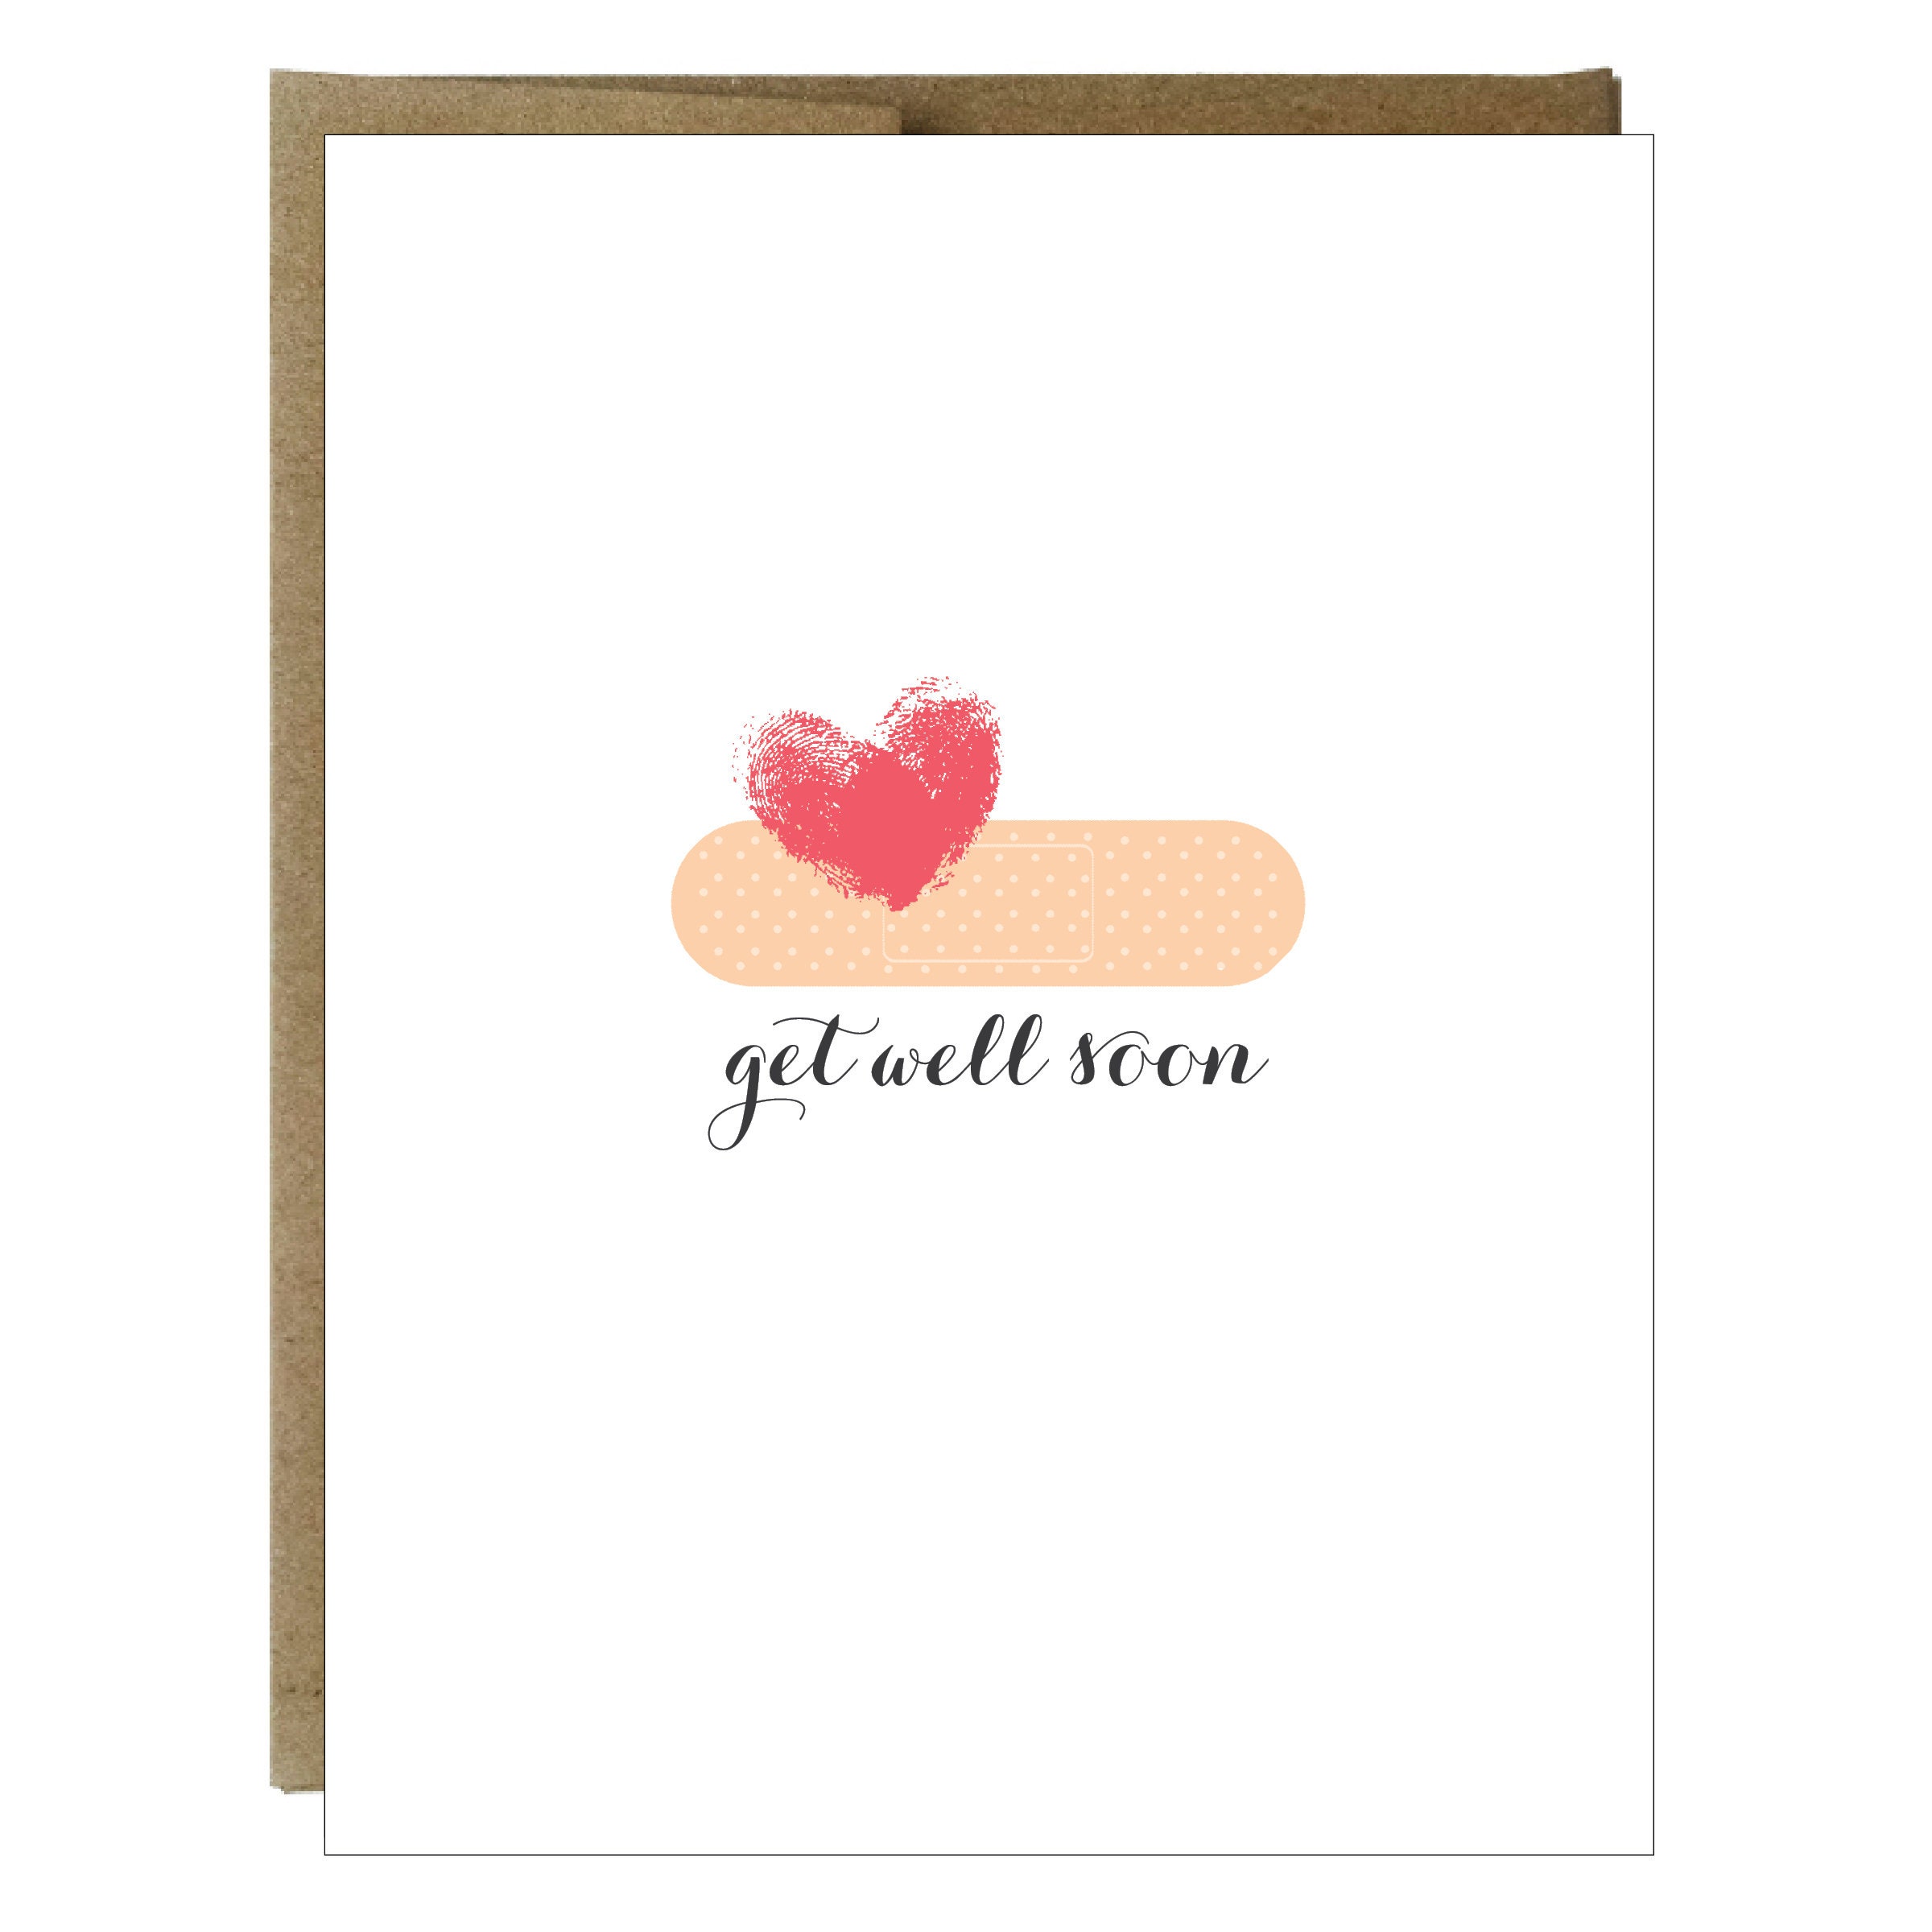 get well cards to print